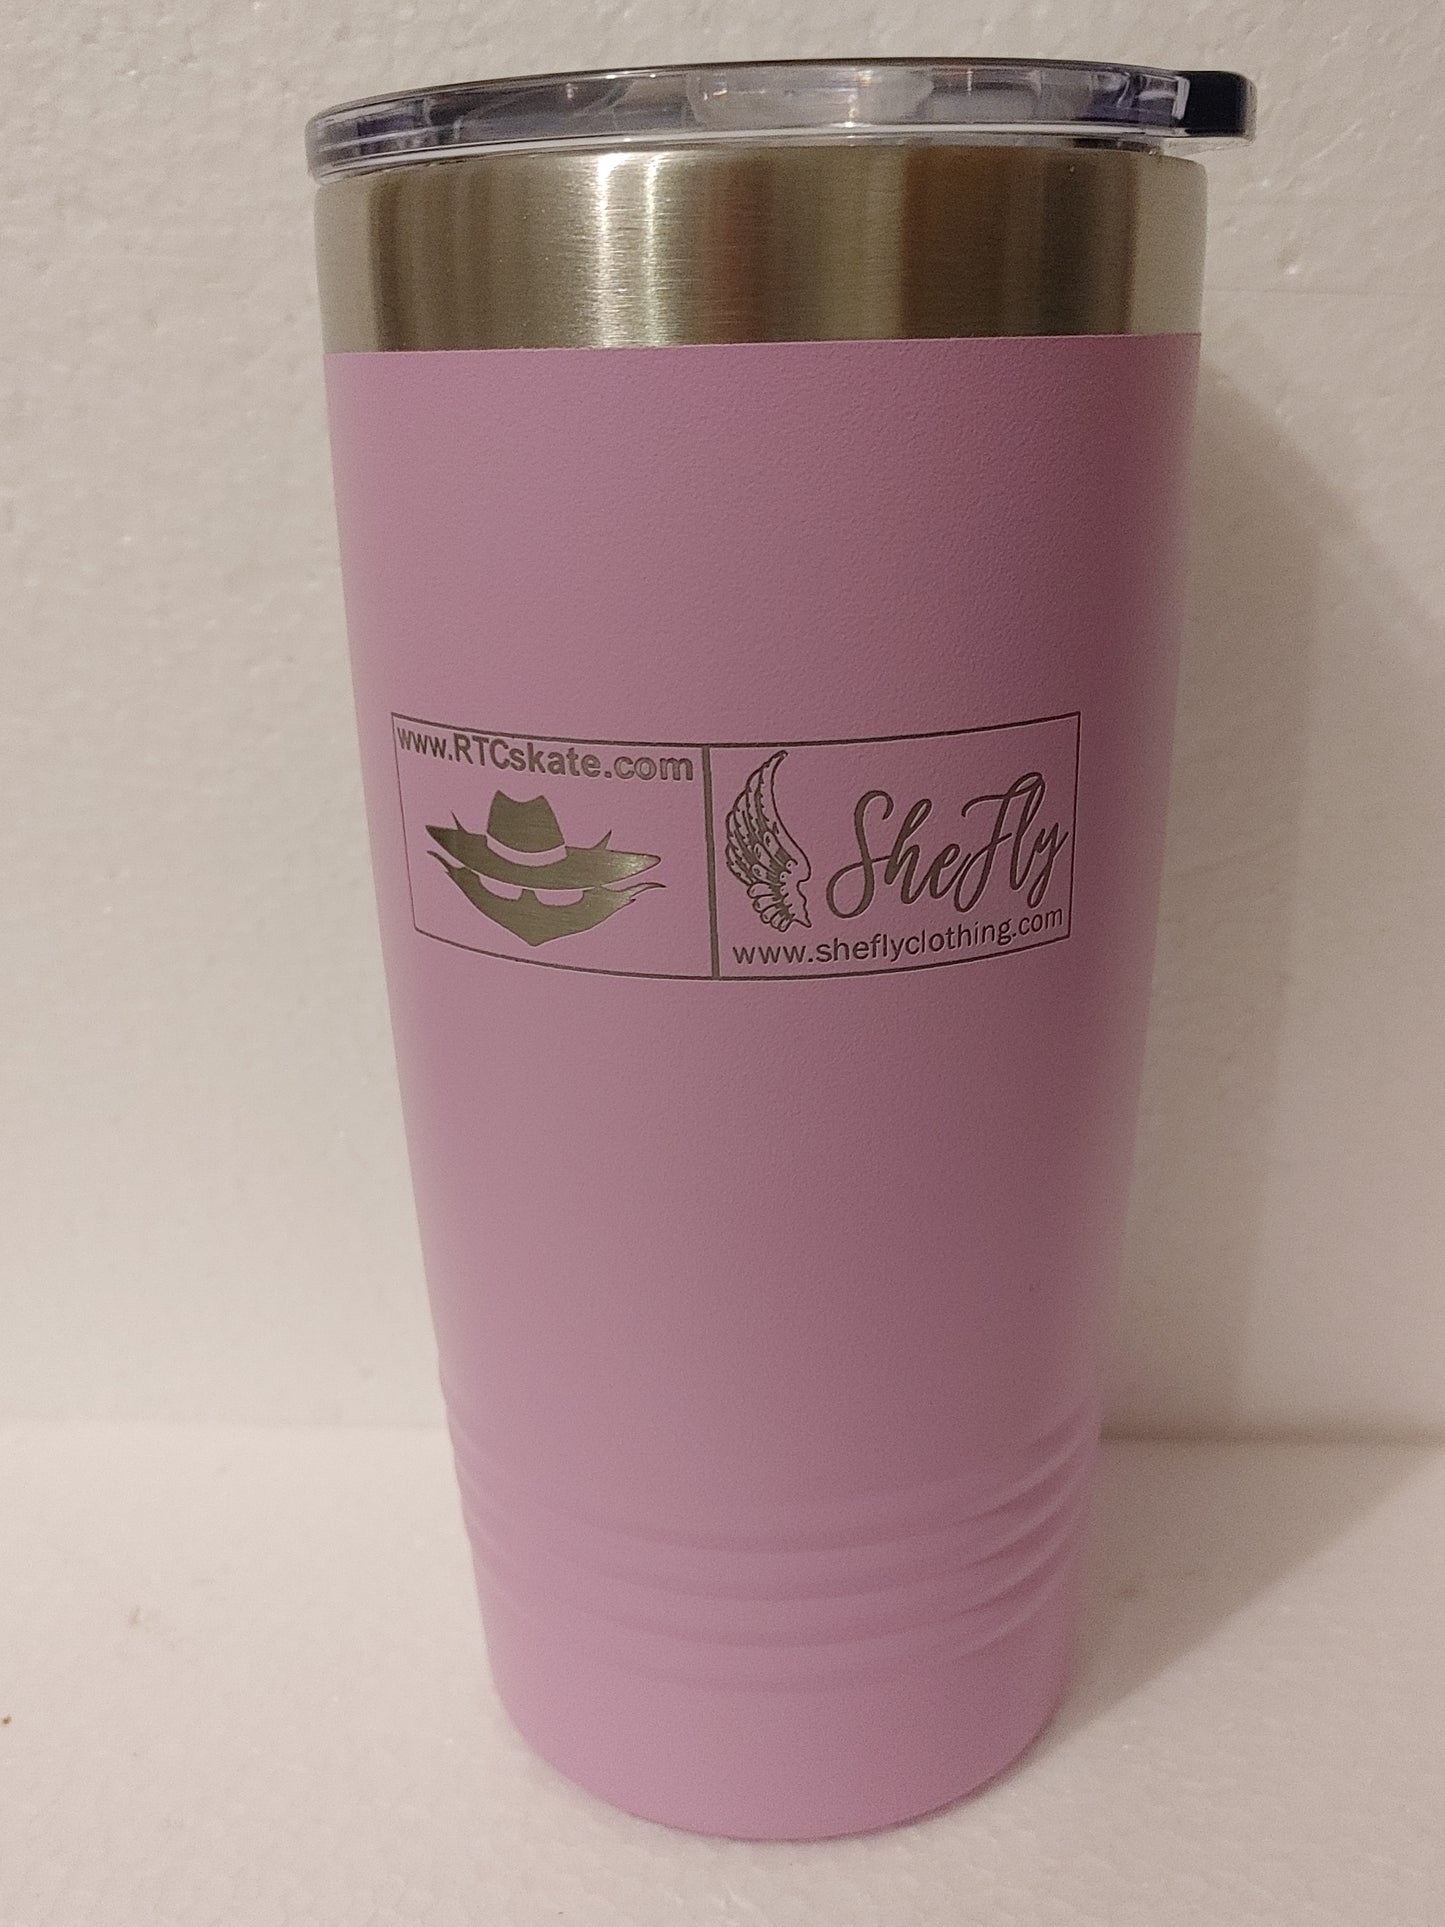 RTCskate Shefly Collabitem Tumbler Cup available in 3 different colors